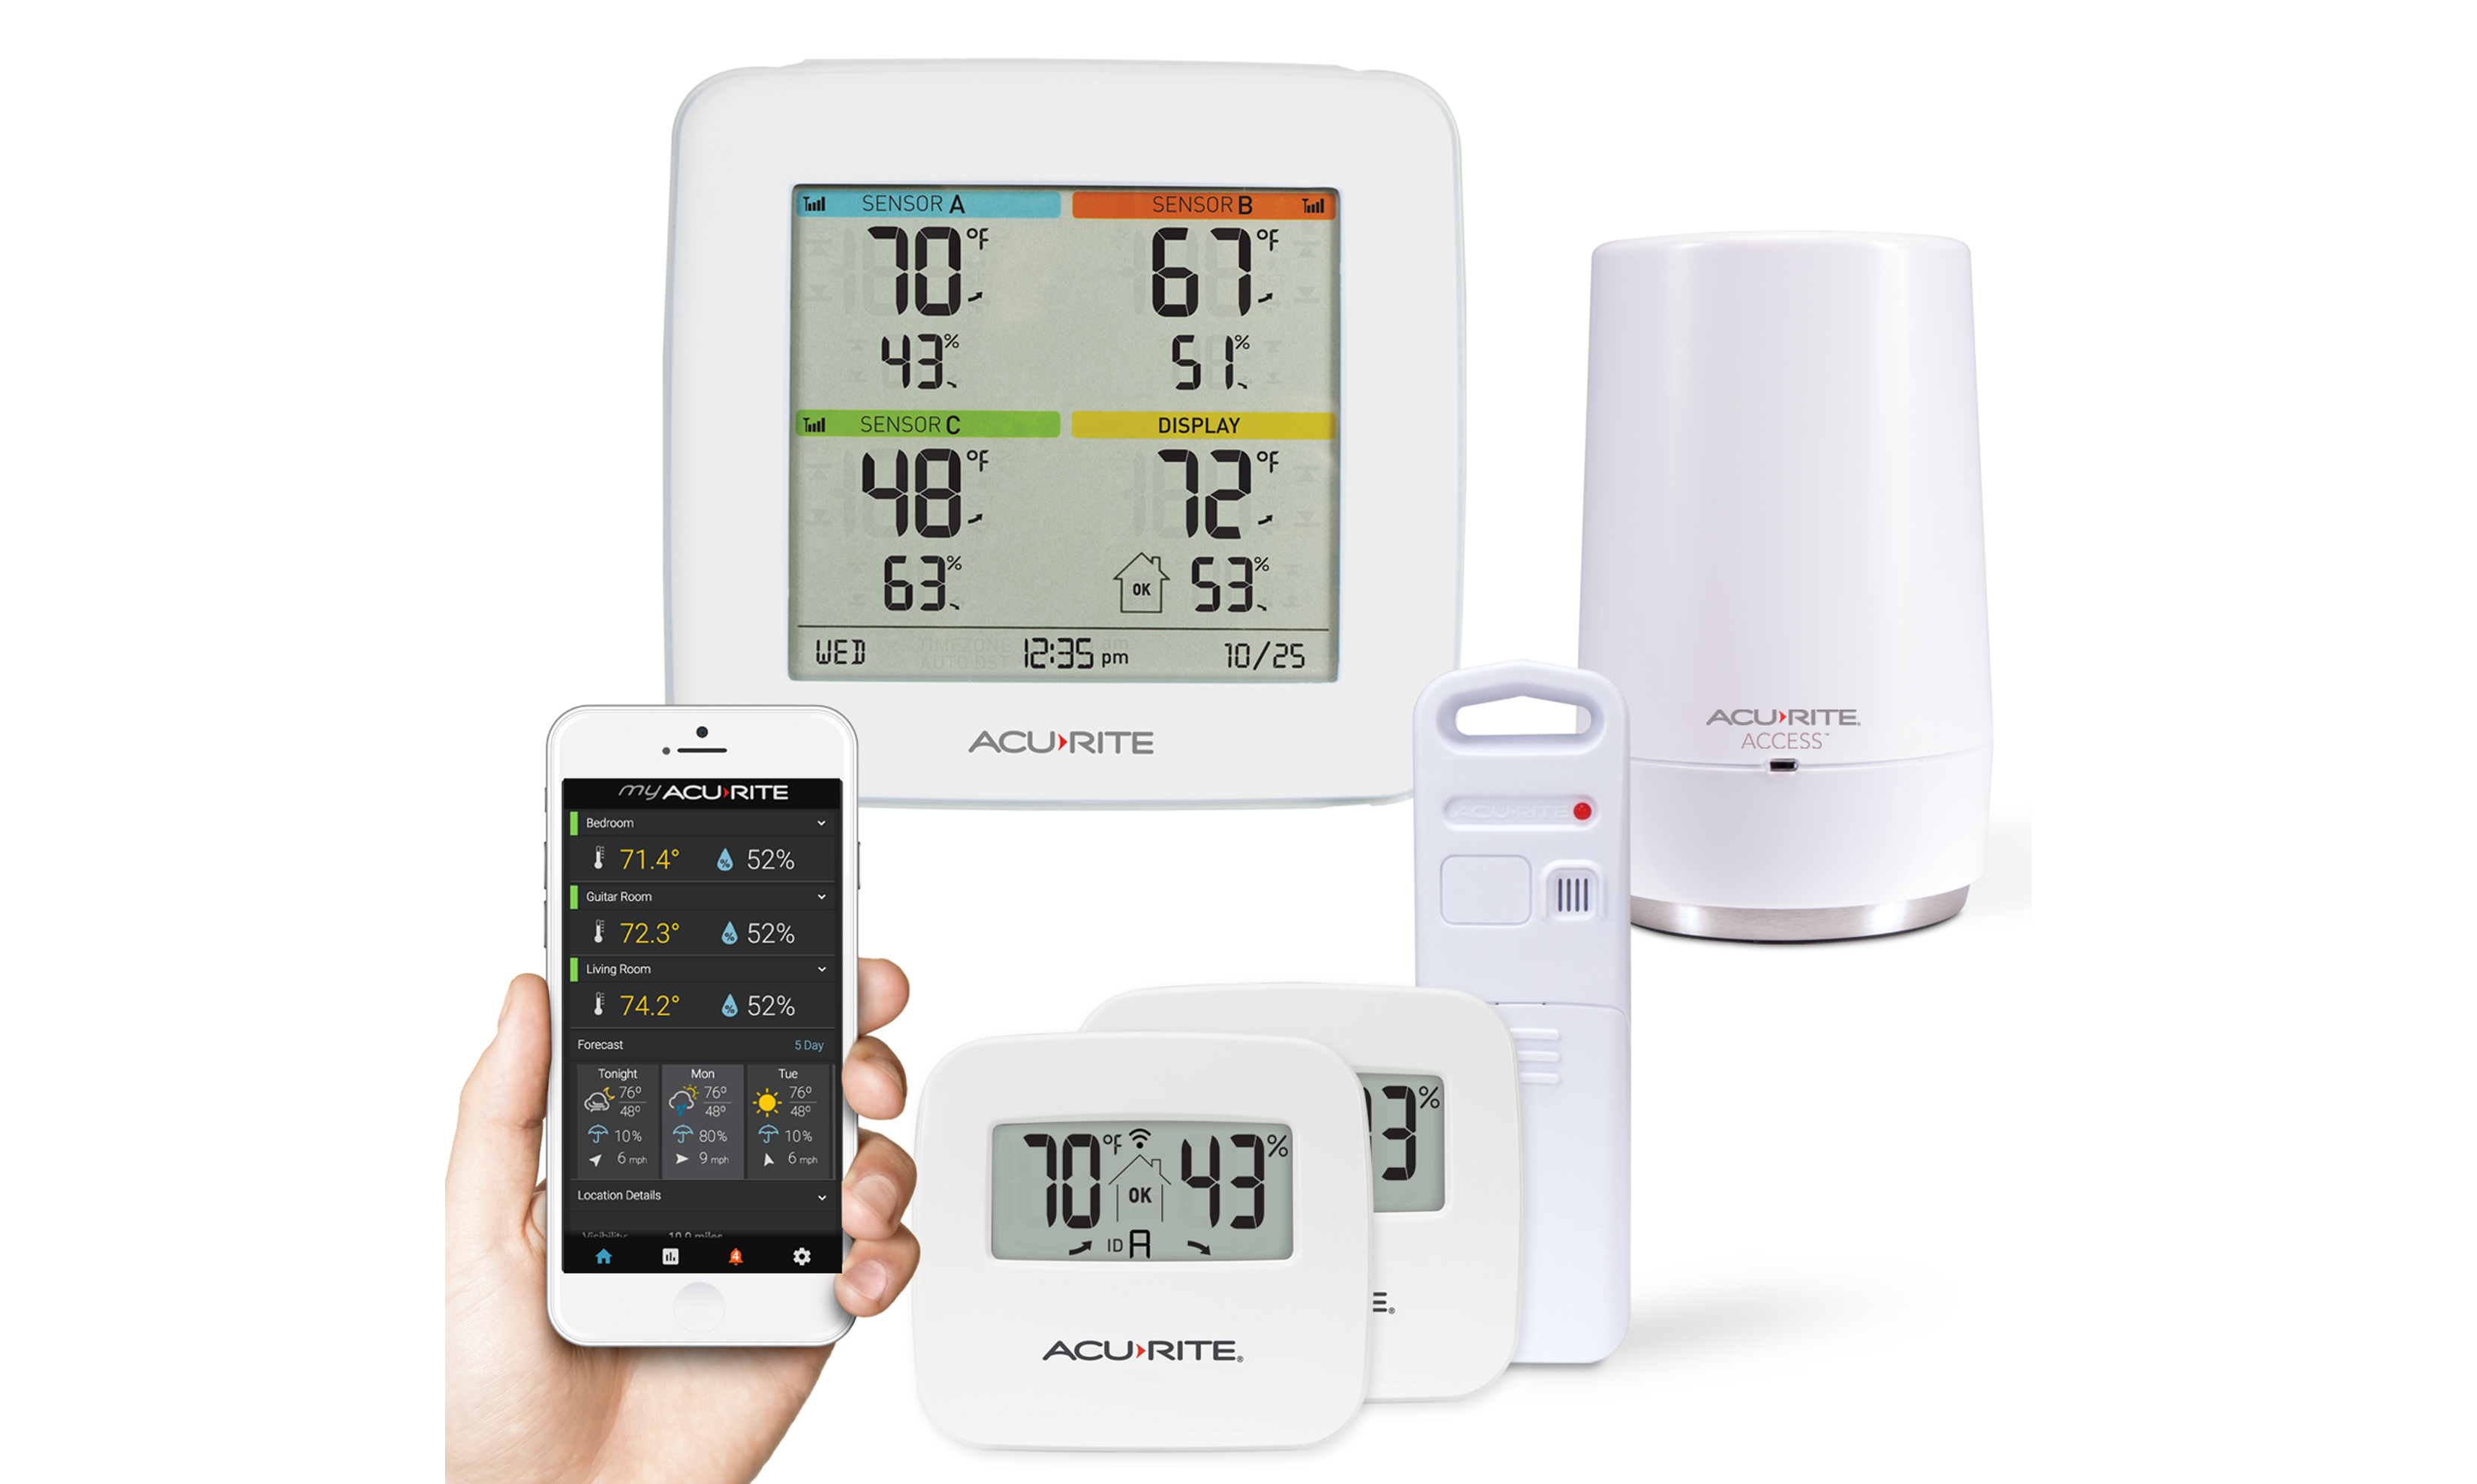 Multi-Sensor Display & 3-Sensor Indoor / Outdoor Smart Home Environment System with My AcuRite